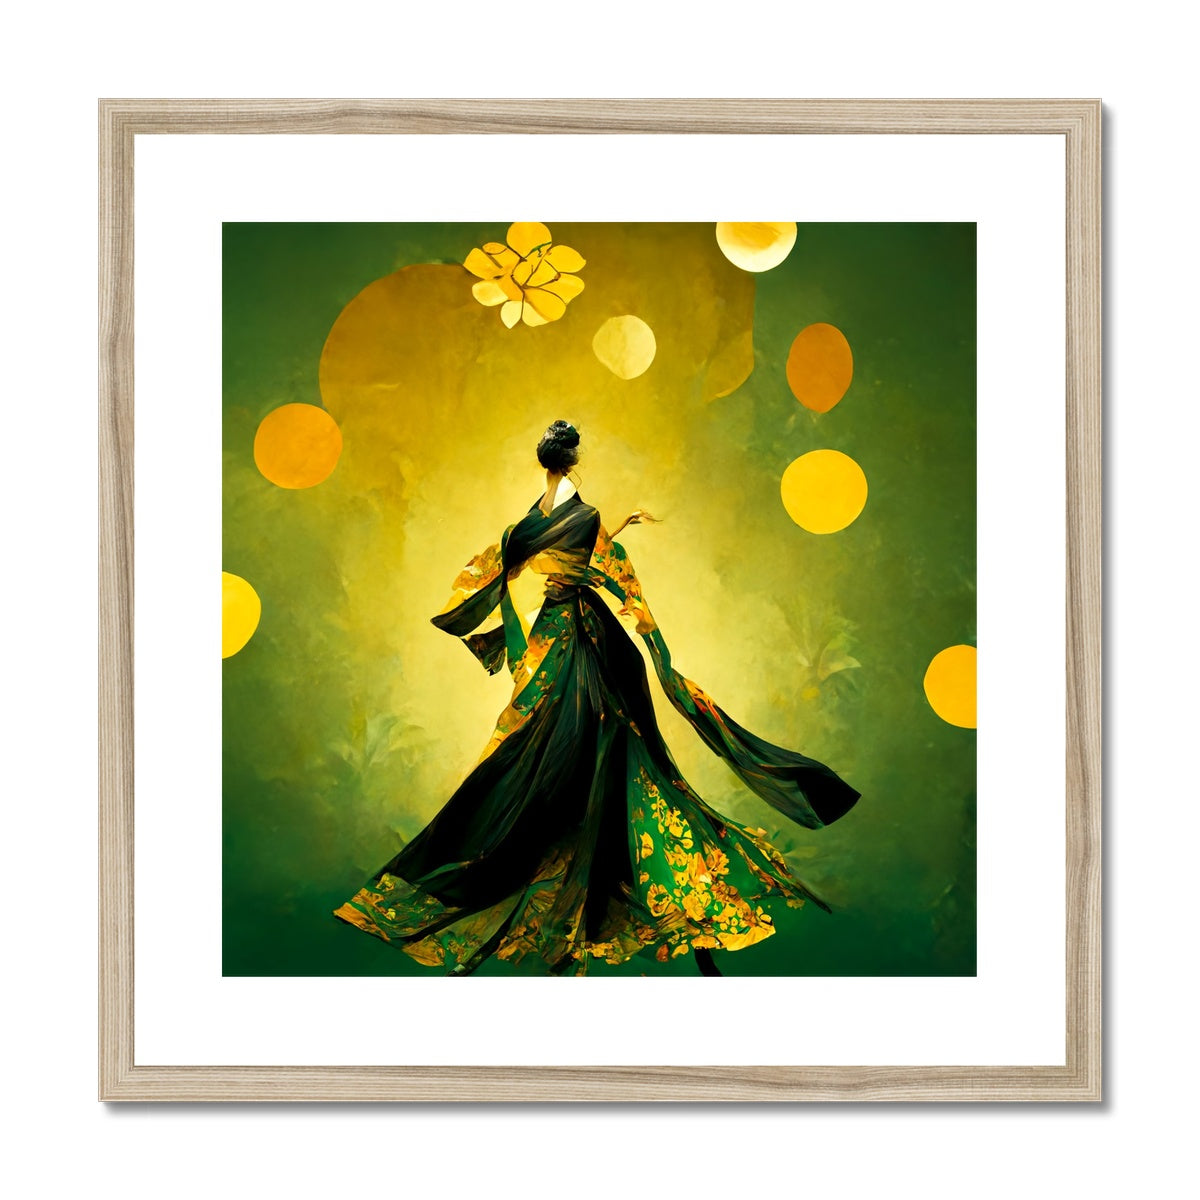 Moon Banquet  Framed & Mounted Print - Pixel Gallery